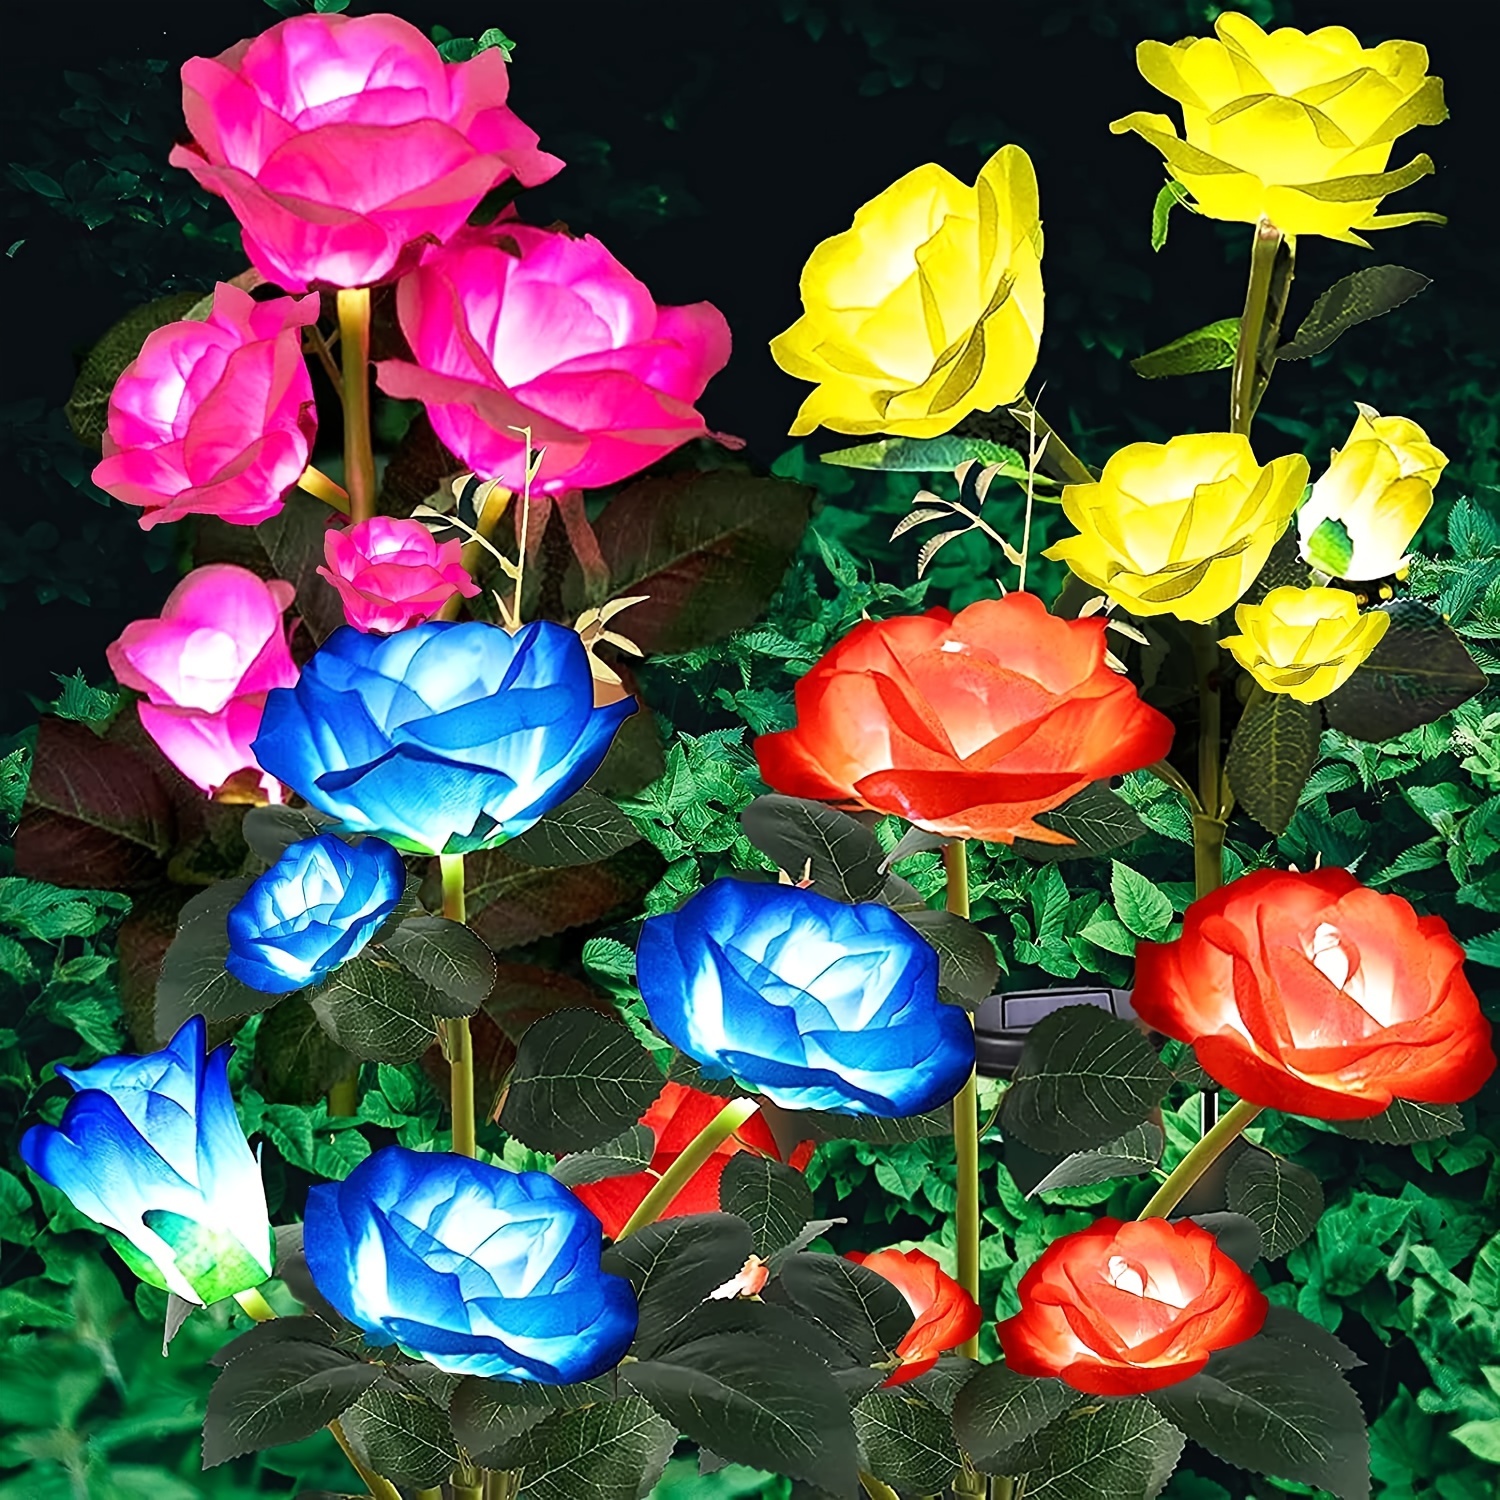 4pcs flower shaped solar flowers garden lights decorative 7 color changing rose lights 20 head rose for pathway patio yard party wedding valentines day outdoor decoration red pink yellow blue details 1